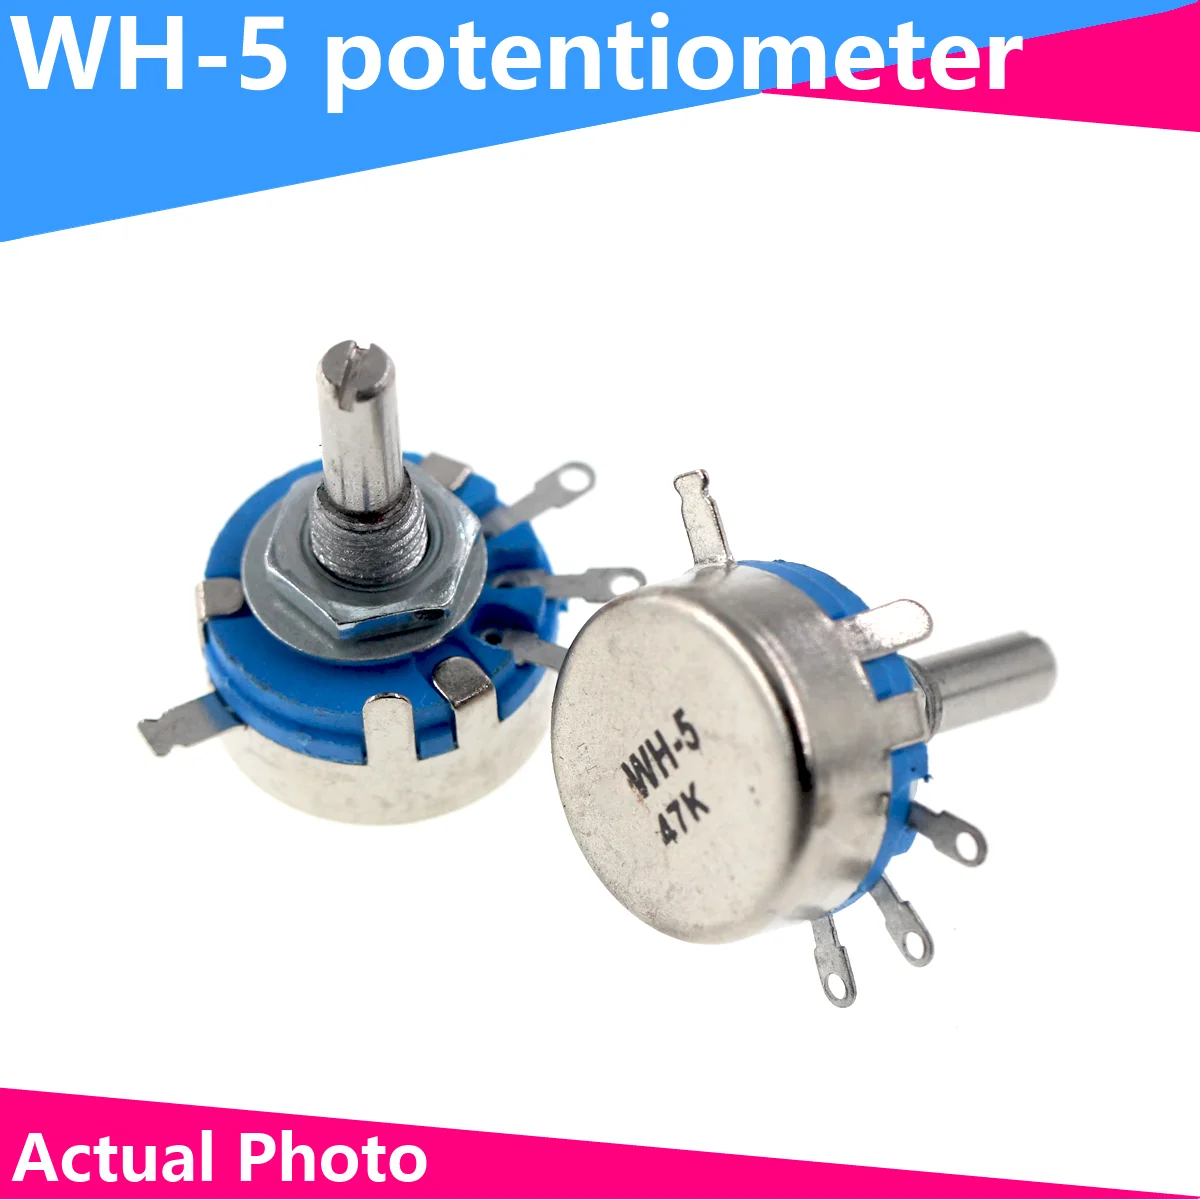 2PCS WH5-1A 470R 1K 10K 47K 4K7 100K 470K 220K 1K5 22K 1M ohm 3-Terminals Round Shaft Rotary Taper Carbon Potentiometer WH5 2pcs lot wh5 1a 470r 1k 10k 47k 4k7 100k 470k 220k 1k5 22k 1m ohm 3 terminals round shaft rotary taper carbon potentiometer